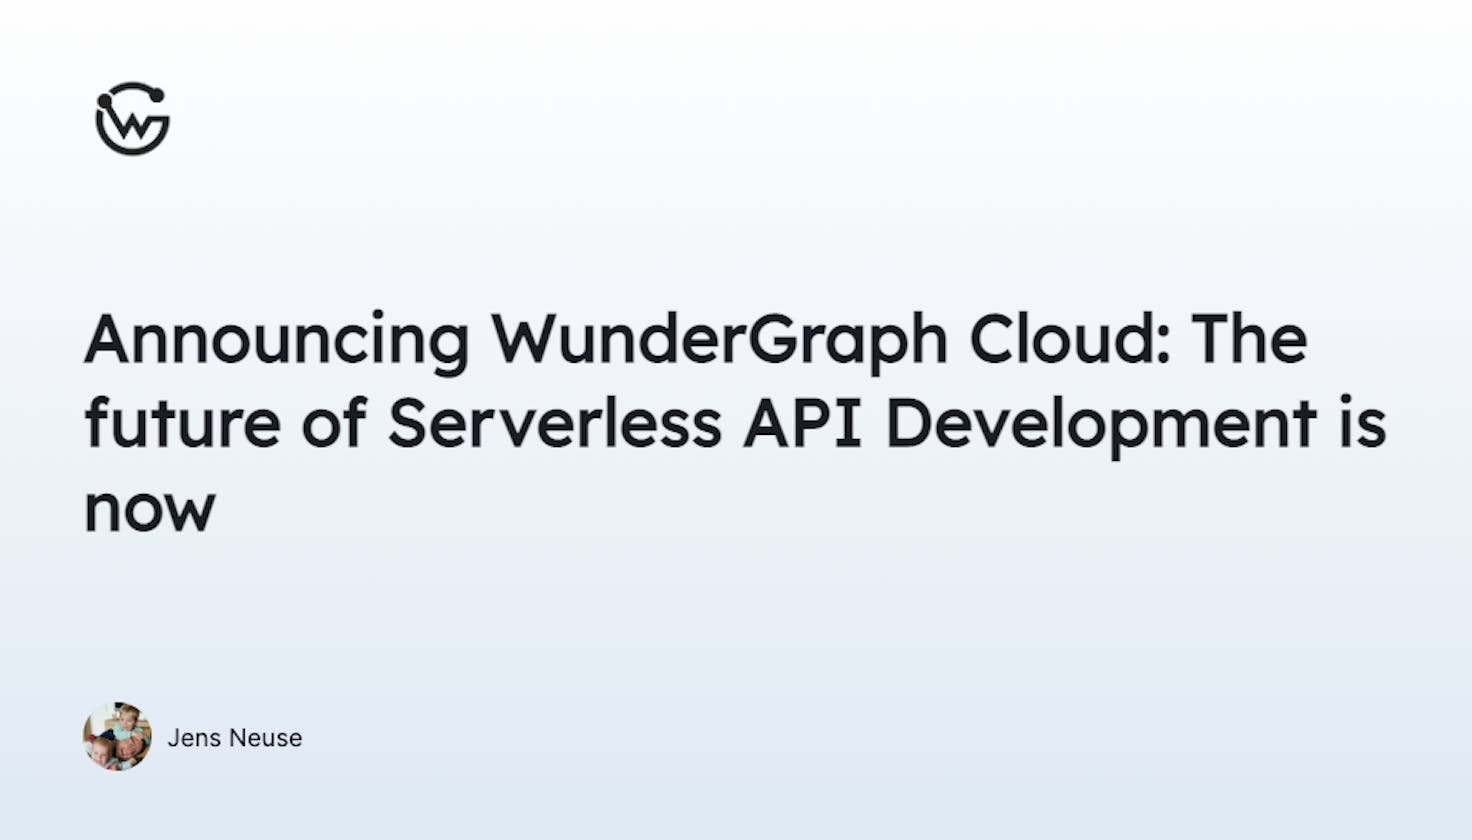 Announcing WunderGraph Cloud: The future of Serverless API Development is now